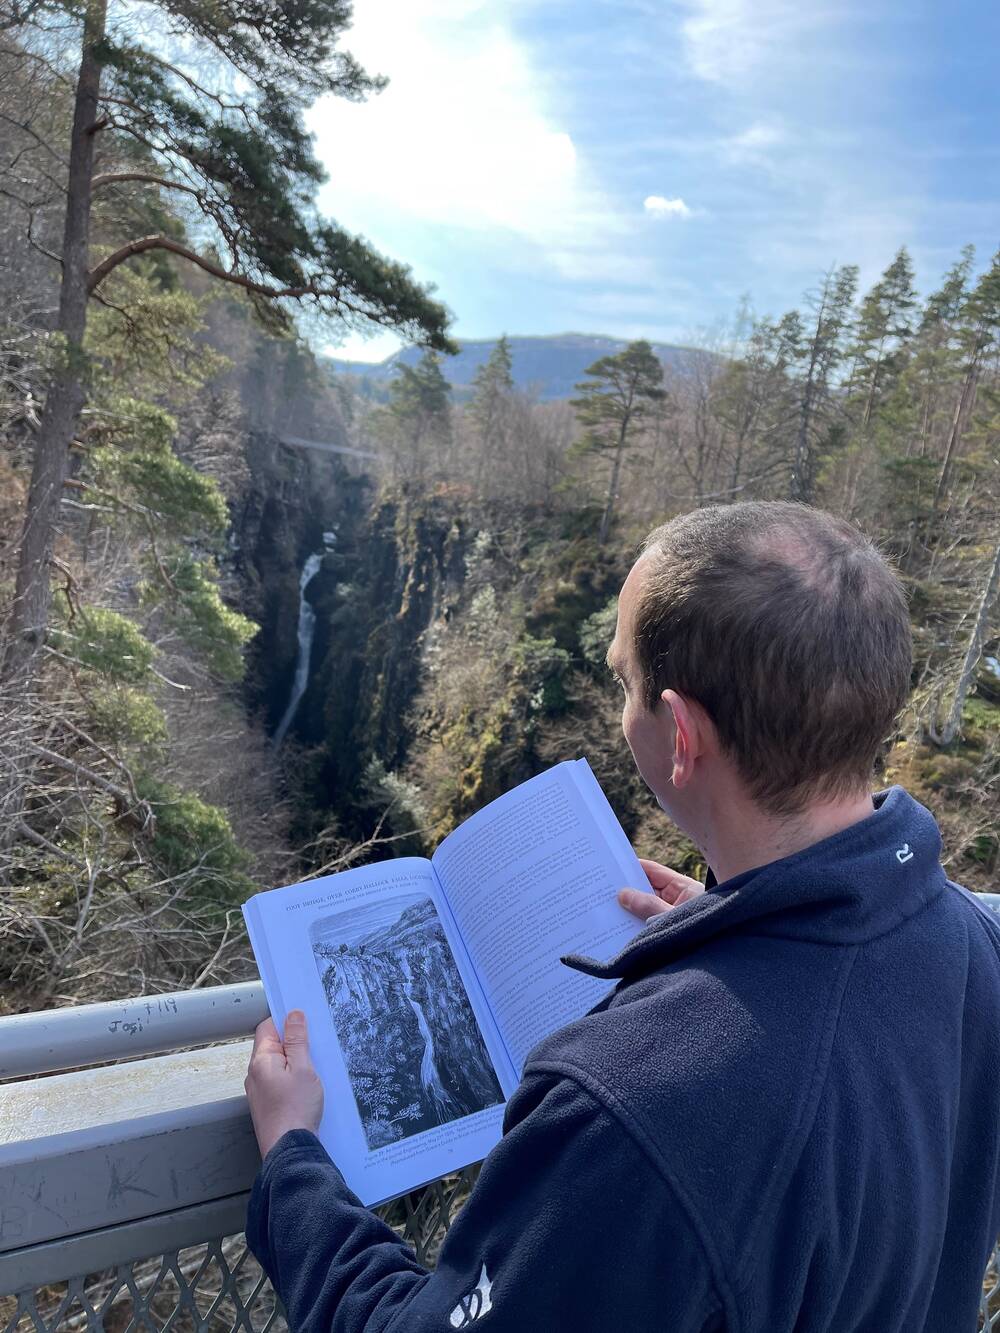 A man stands with his back to the camera, holding an open book that rests against railings. He is looking at a view of a suspension bridge that crosses a deep gorge. The same view is illustrated on the open page of the book.